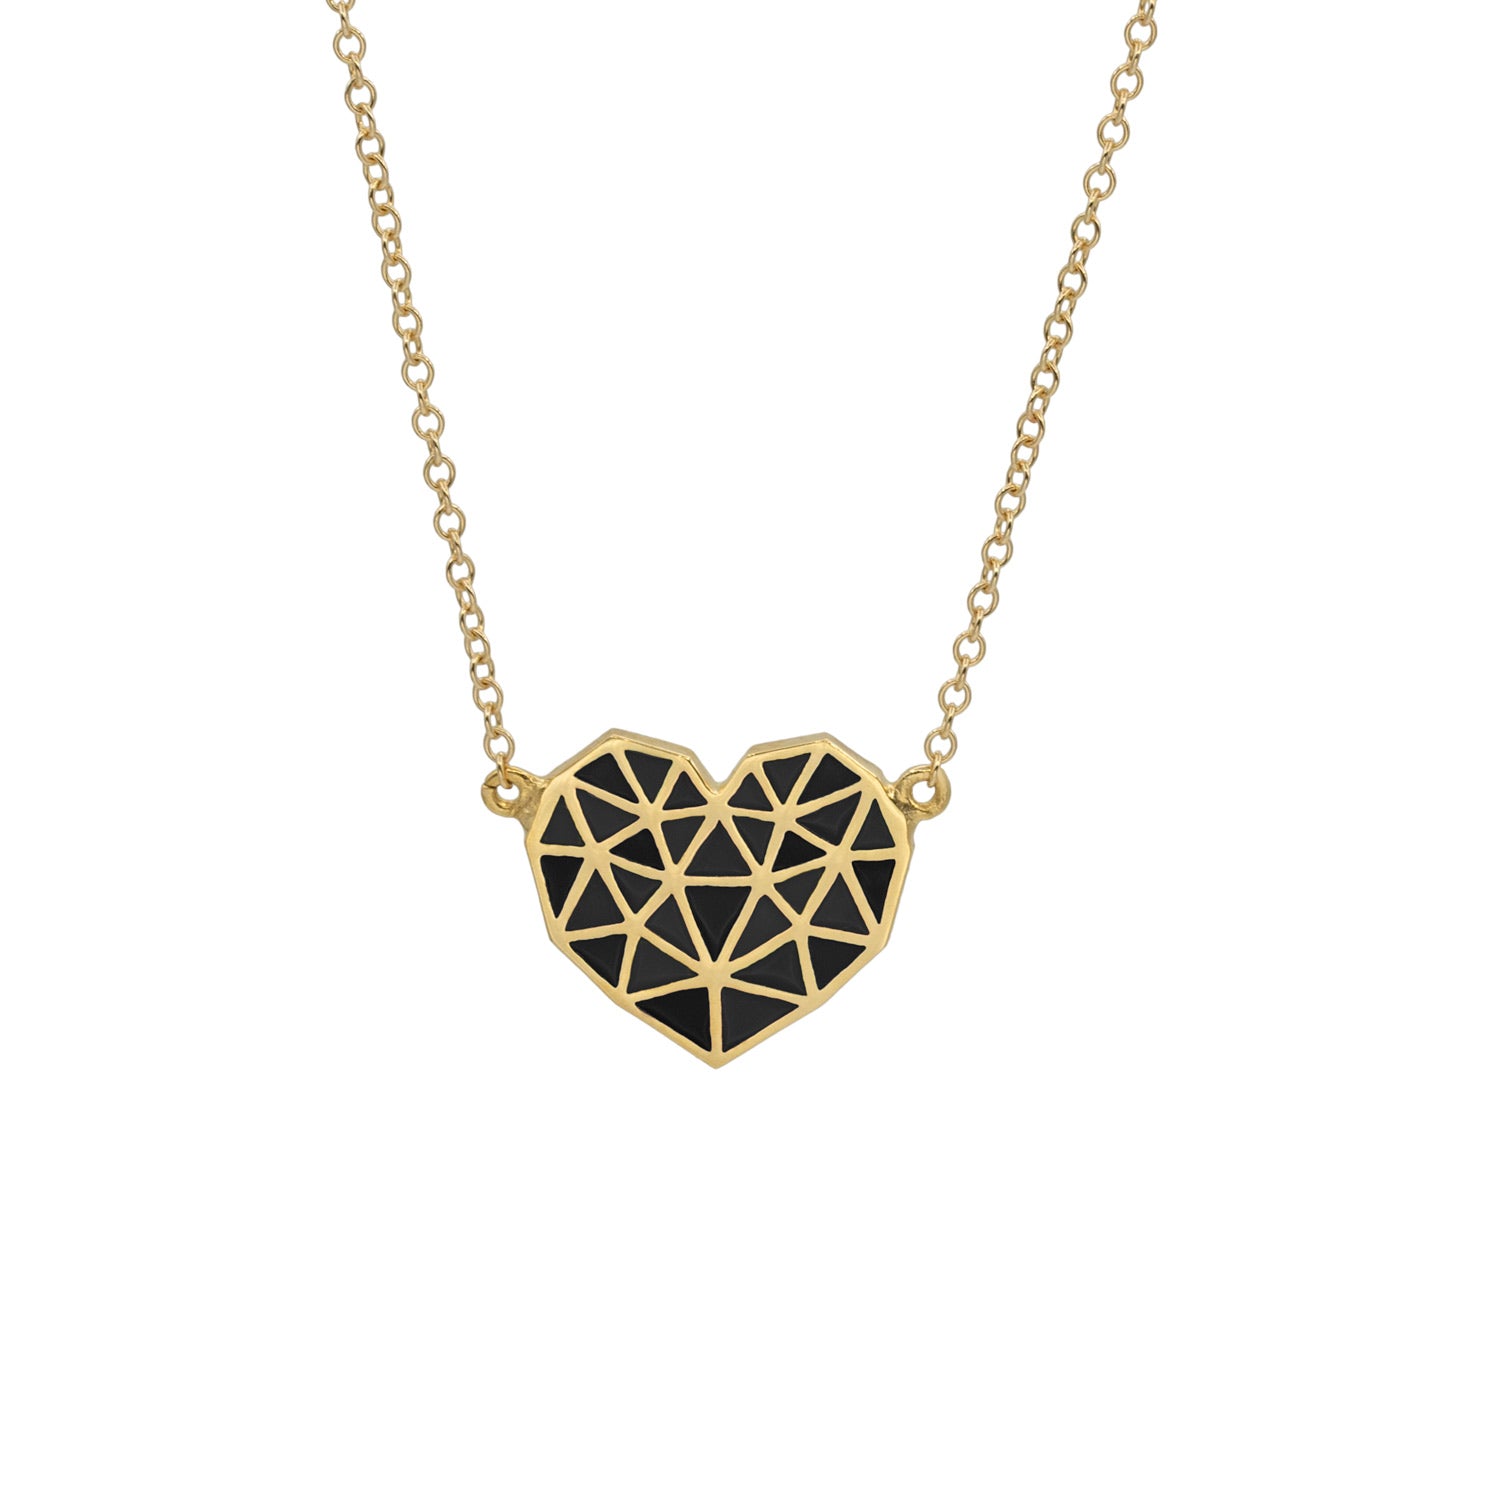 Black Heart necklace made up of triangles